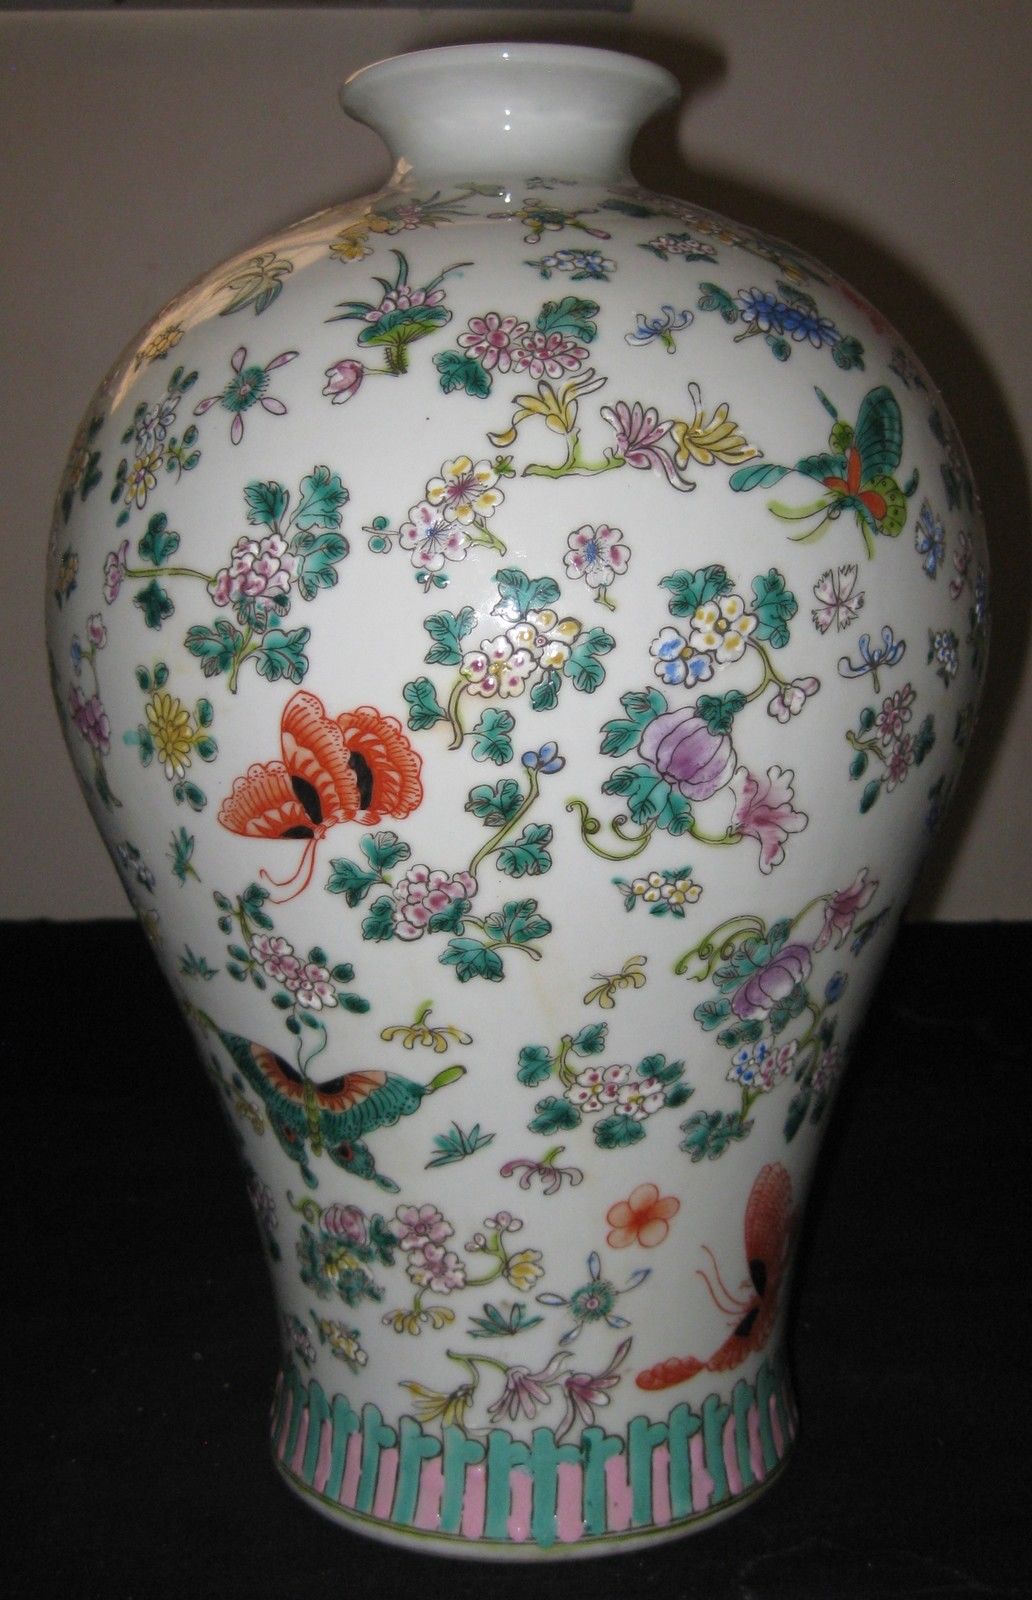 ANTIQUE CHINESE PORCELAIN BUTTERFLY FLOWER VASE,19TH C,QING DYNASTY,KANGXI MARK.